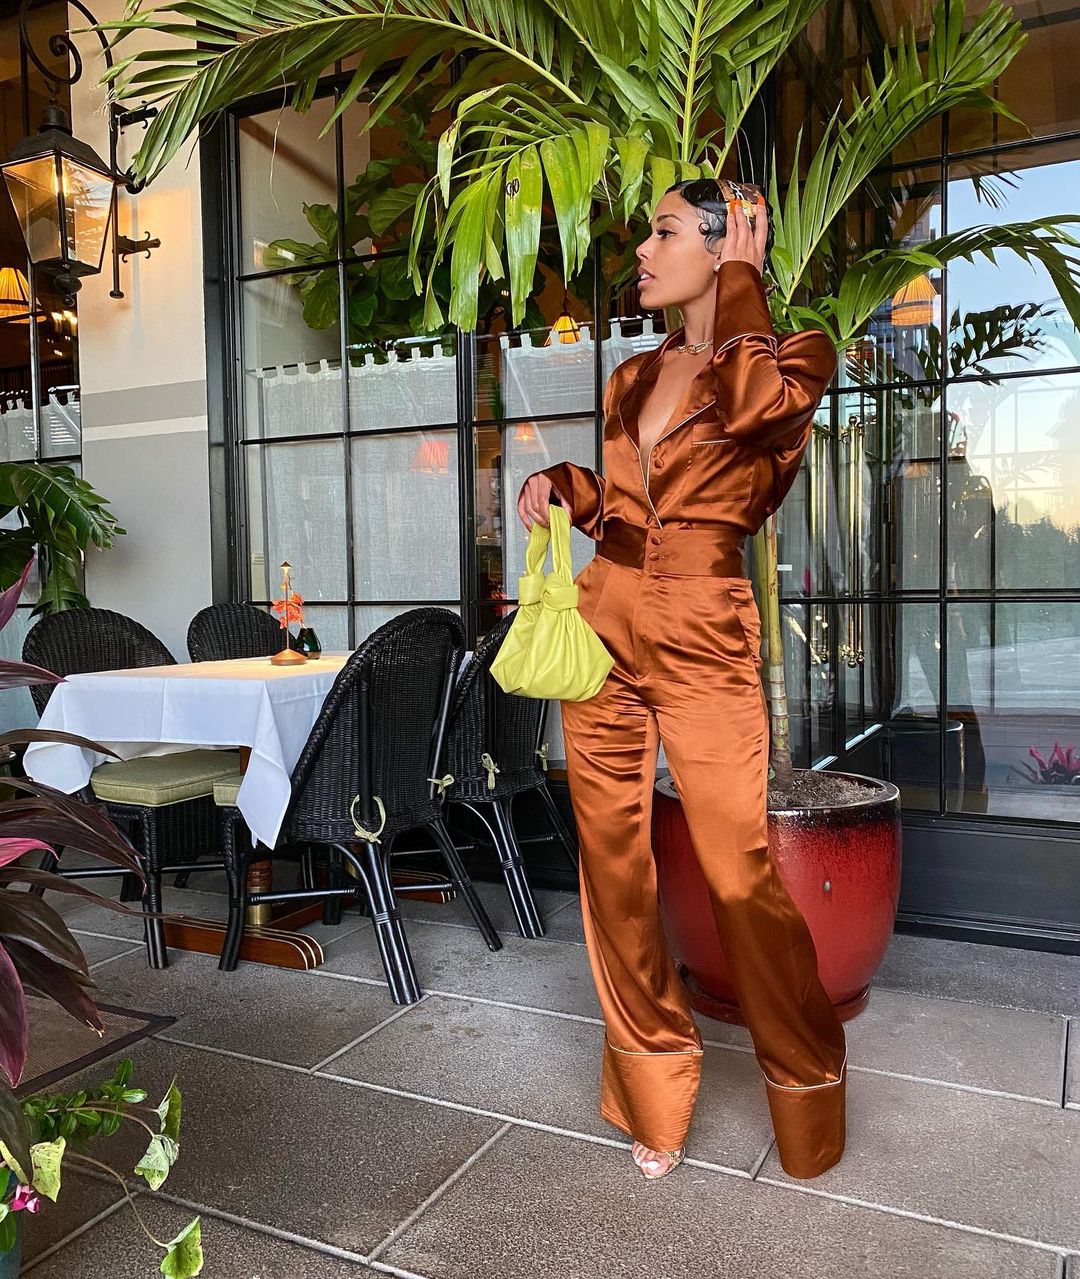 Pajama Trends 2020: How To Win This Season - Chic Looks + Styling Tips!